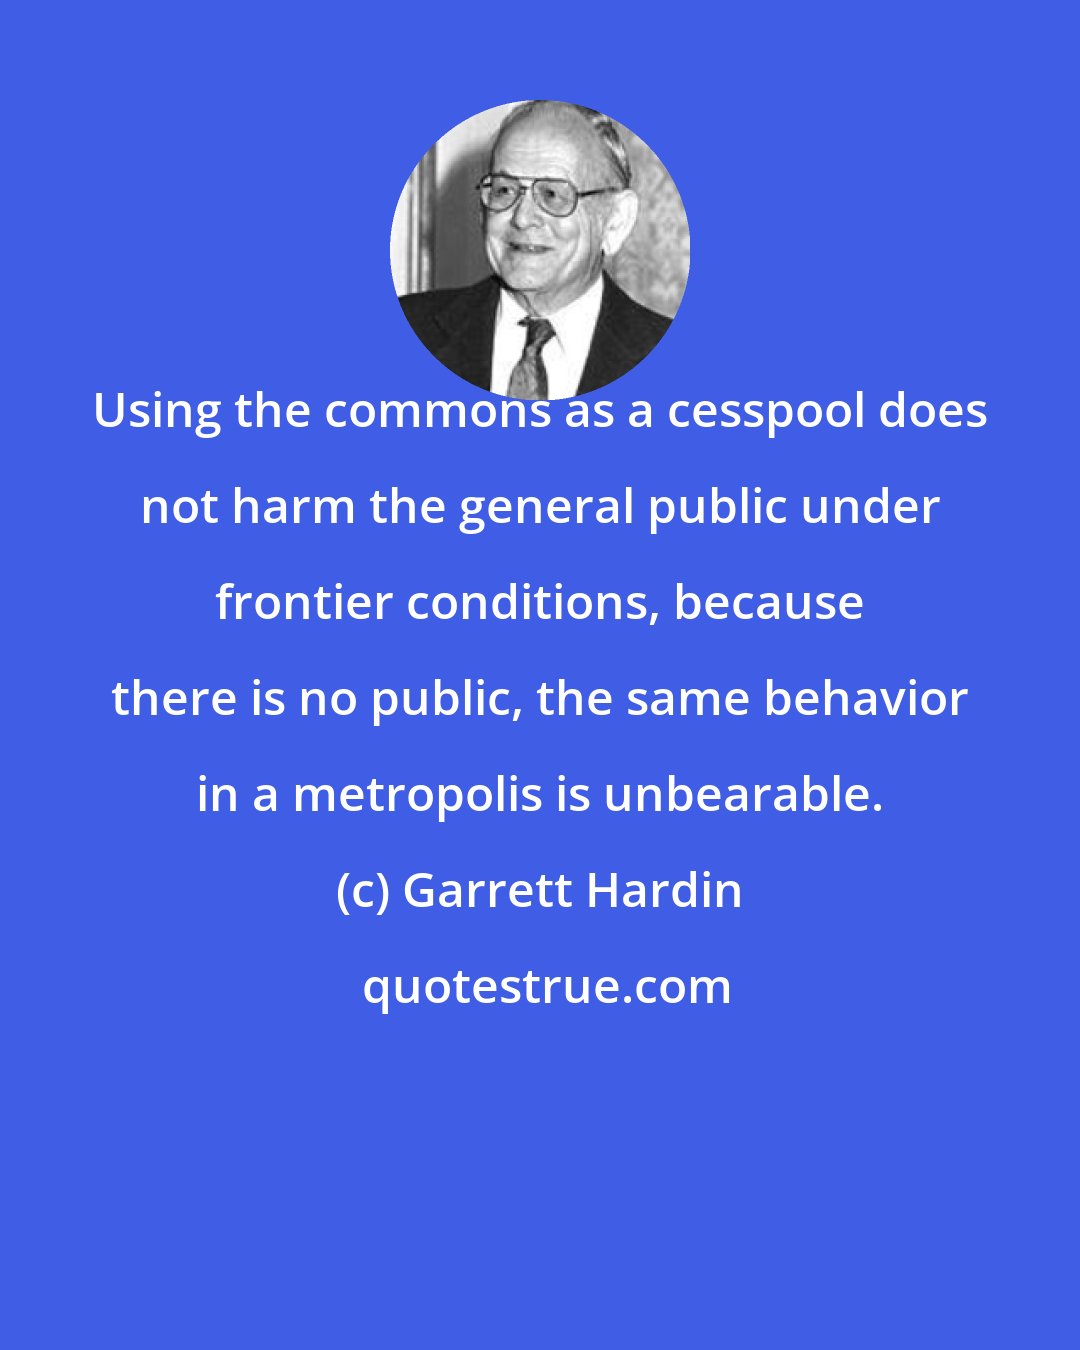 Garrett Hardin: Using the commons as a cesspool does not harm the general public under frontier conditions, because there is no public, the same behavior in a metropolis is unbearable.